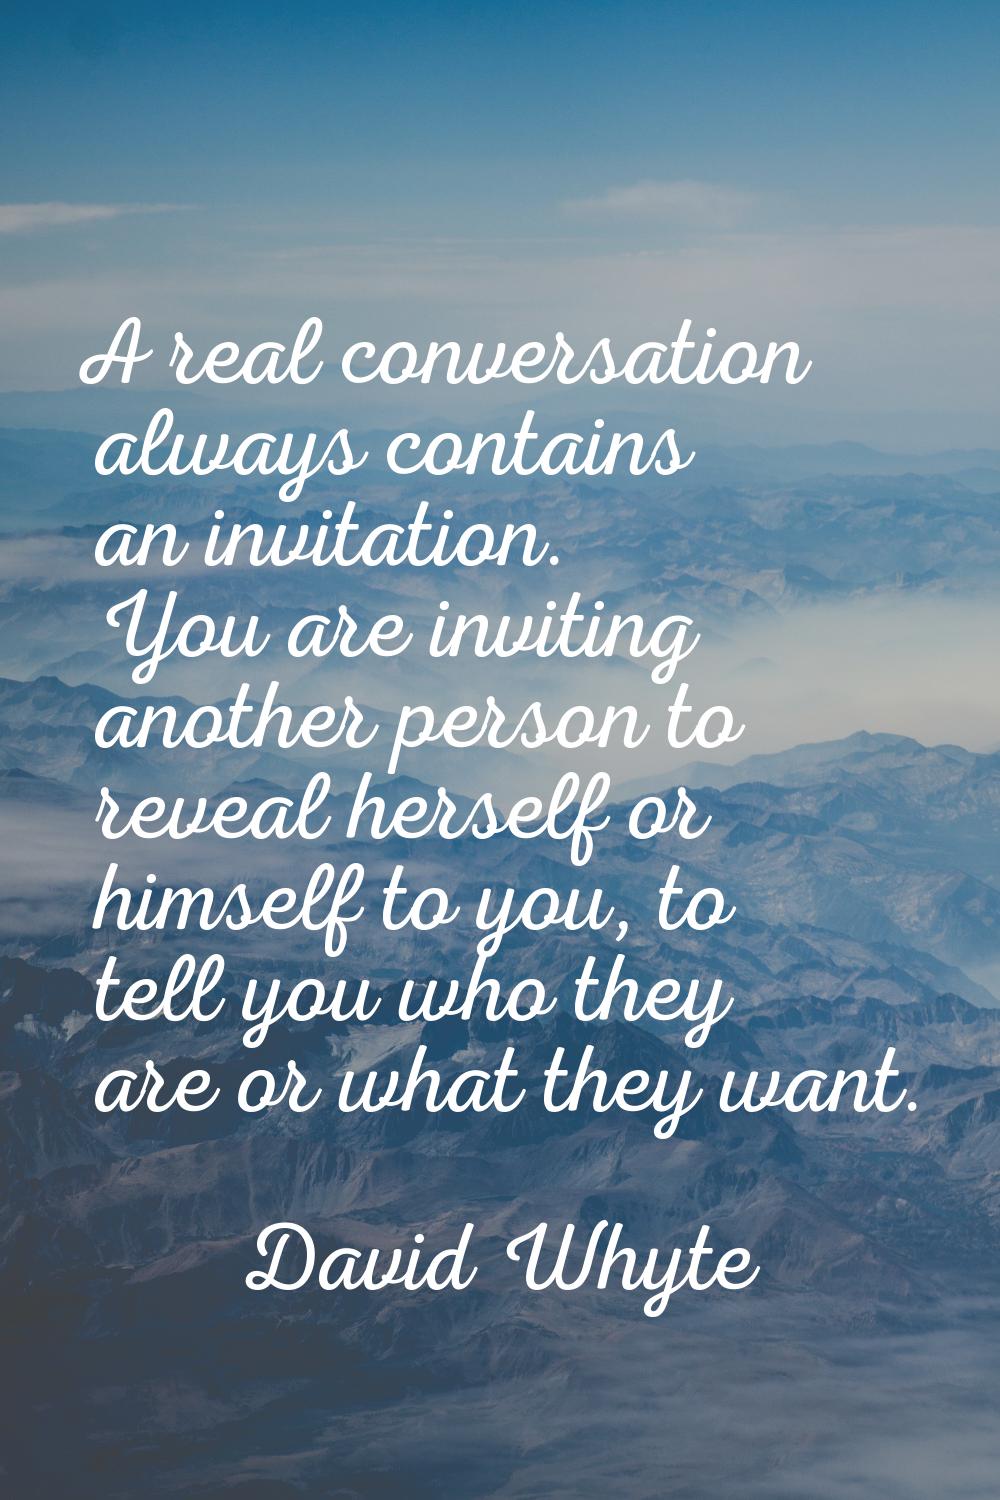 A real conversation always contains an invitation. You are inviting another person to reveal hersel